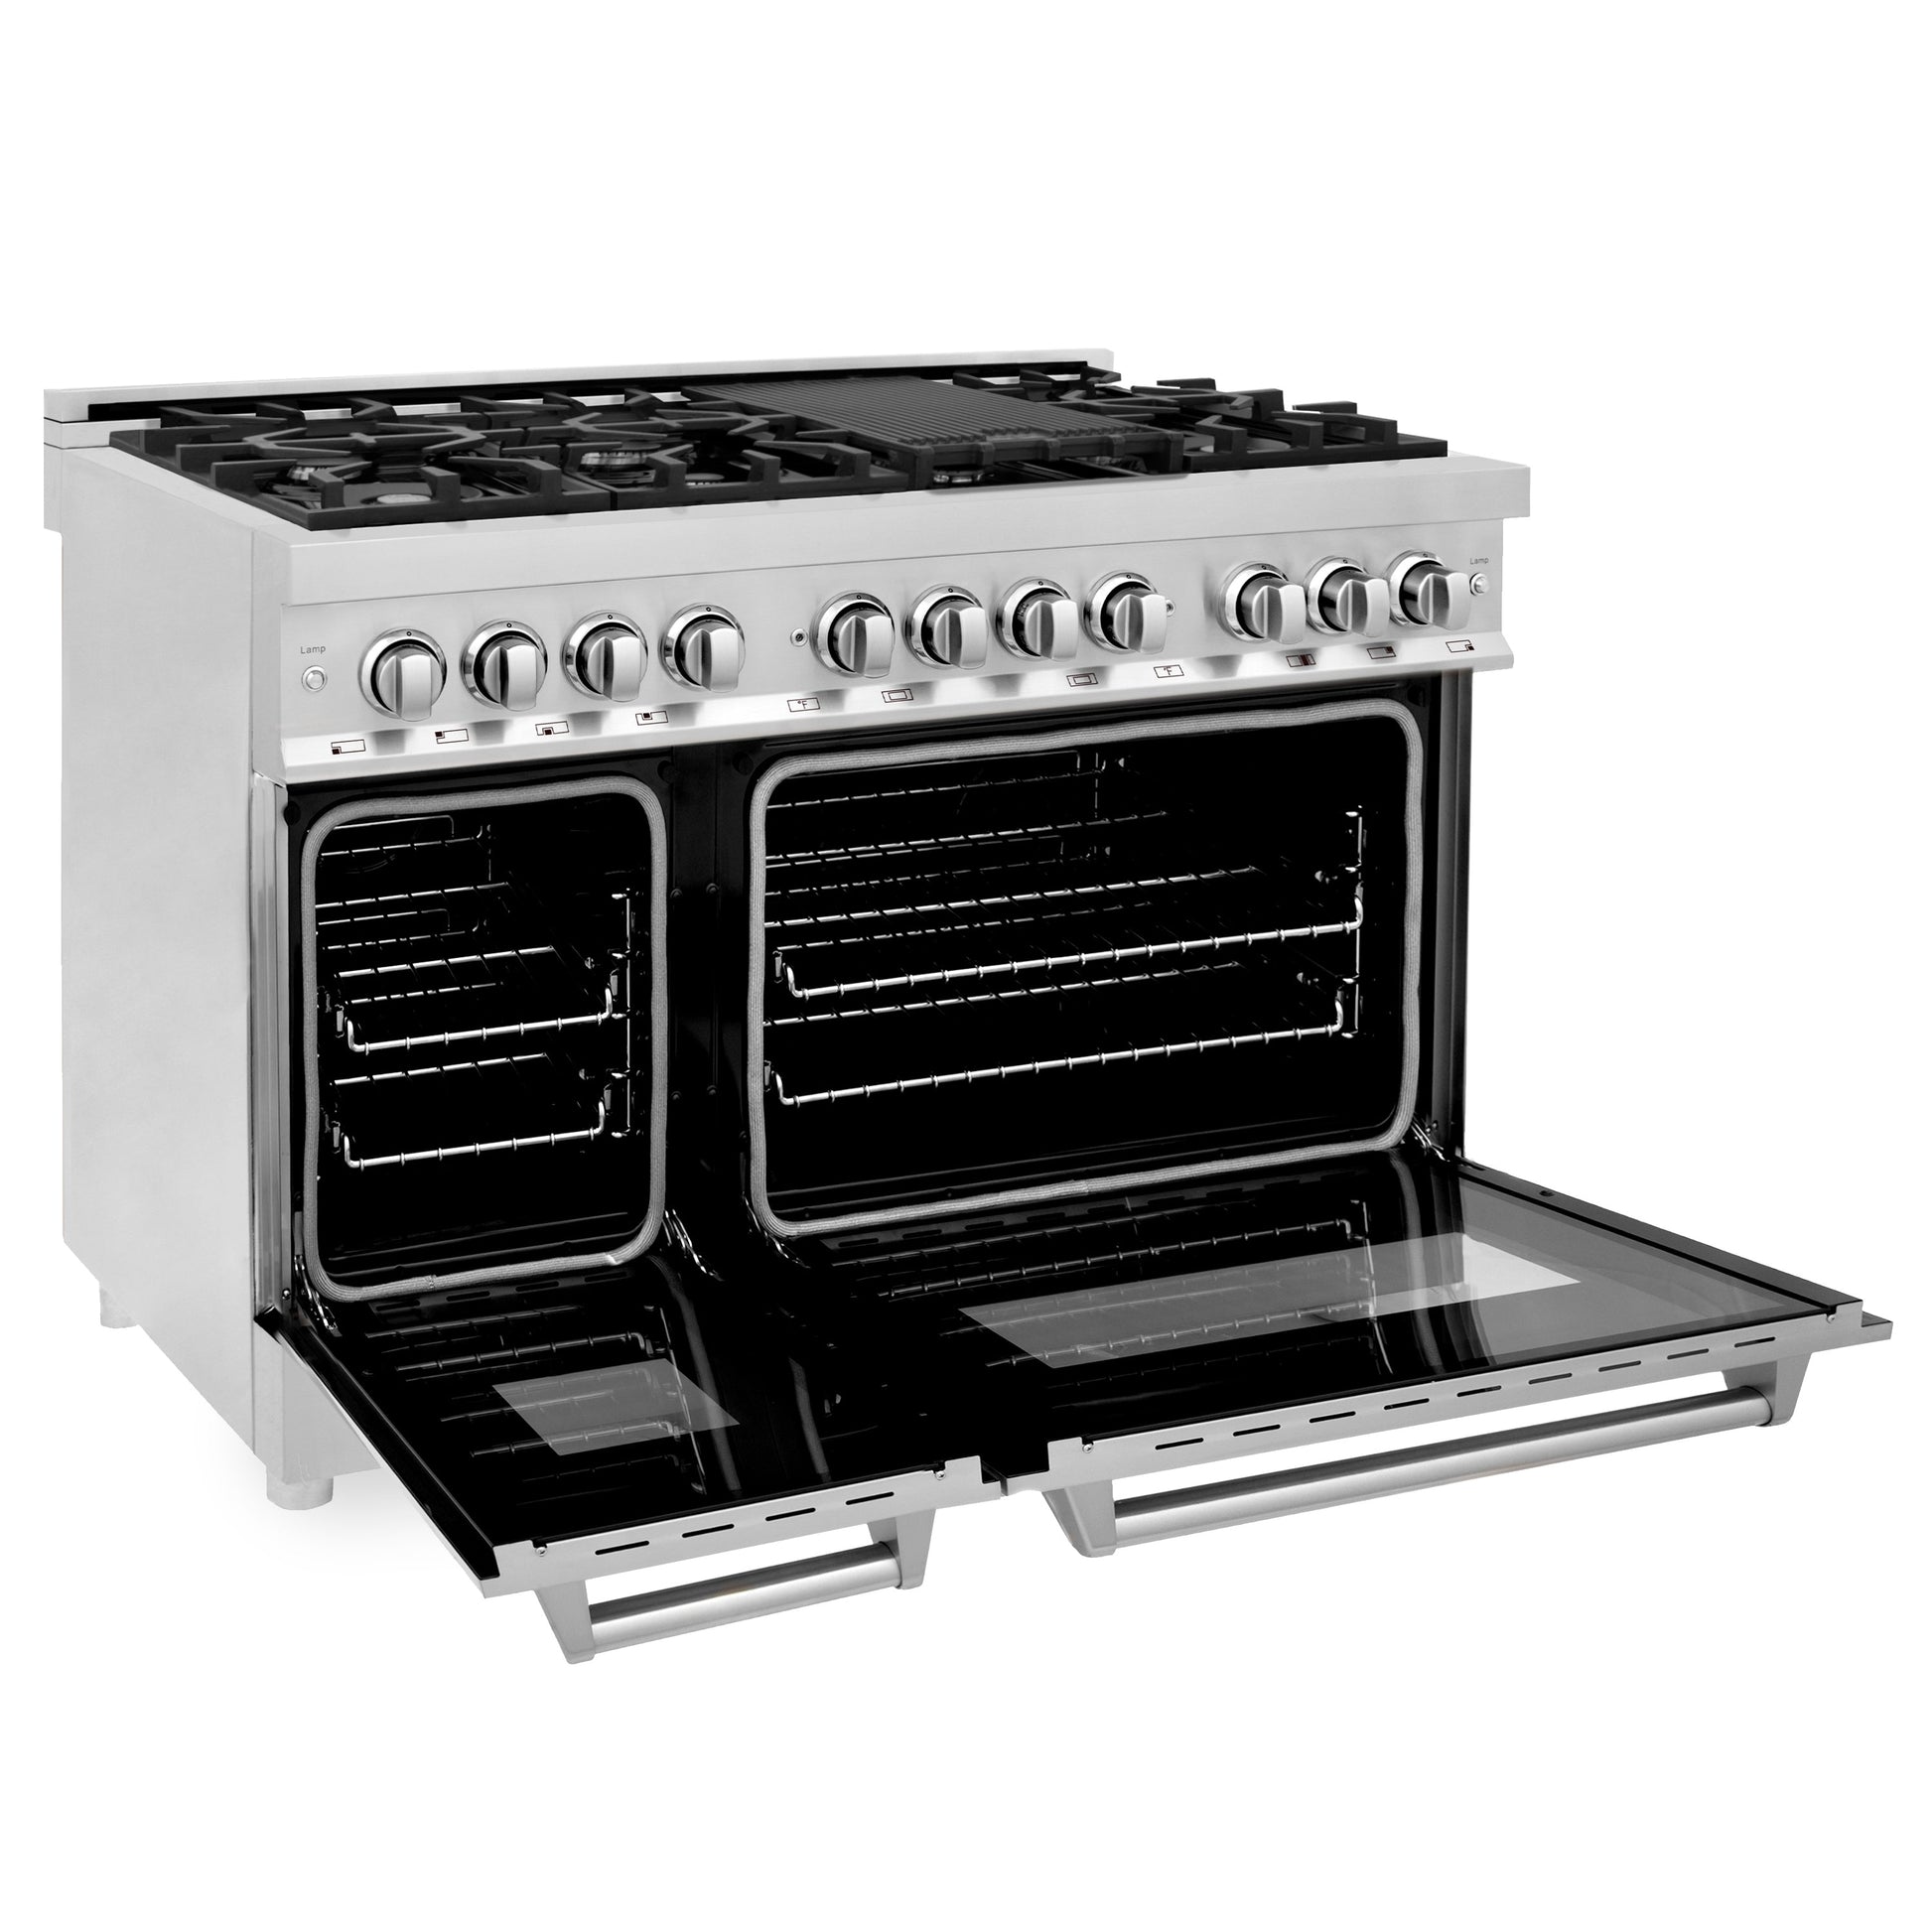 ZLINE 48" Kitchen Package with Dual Fuel Range, Range Hood, Microwave Drawer, and Tall Tub Dishwasher - Stainless Steel